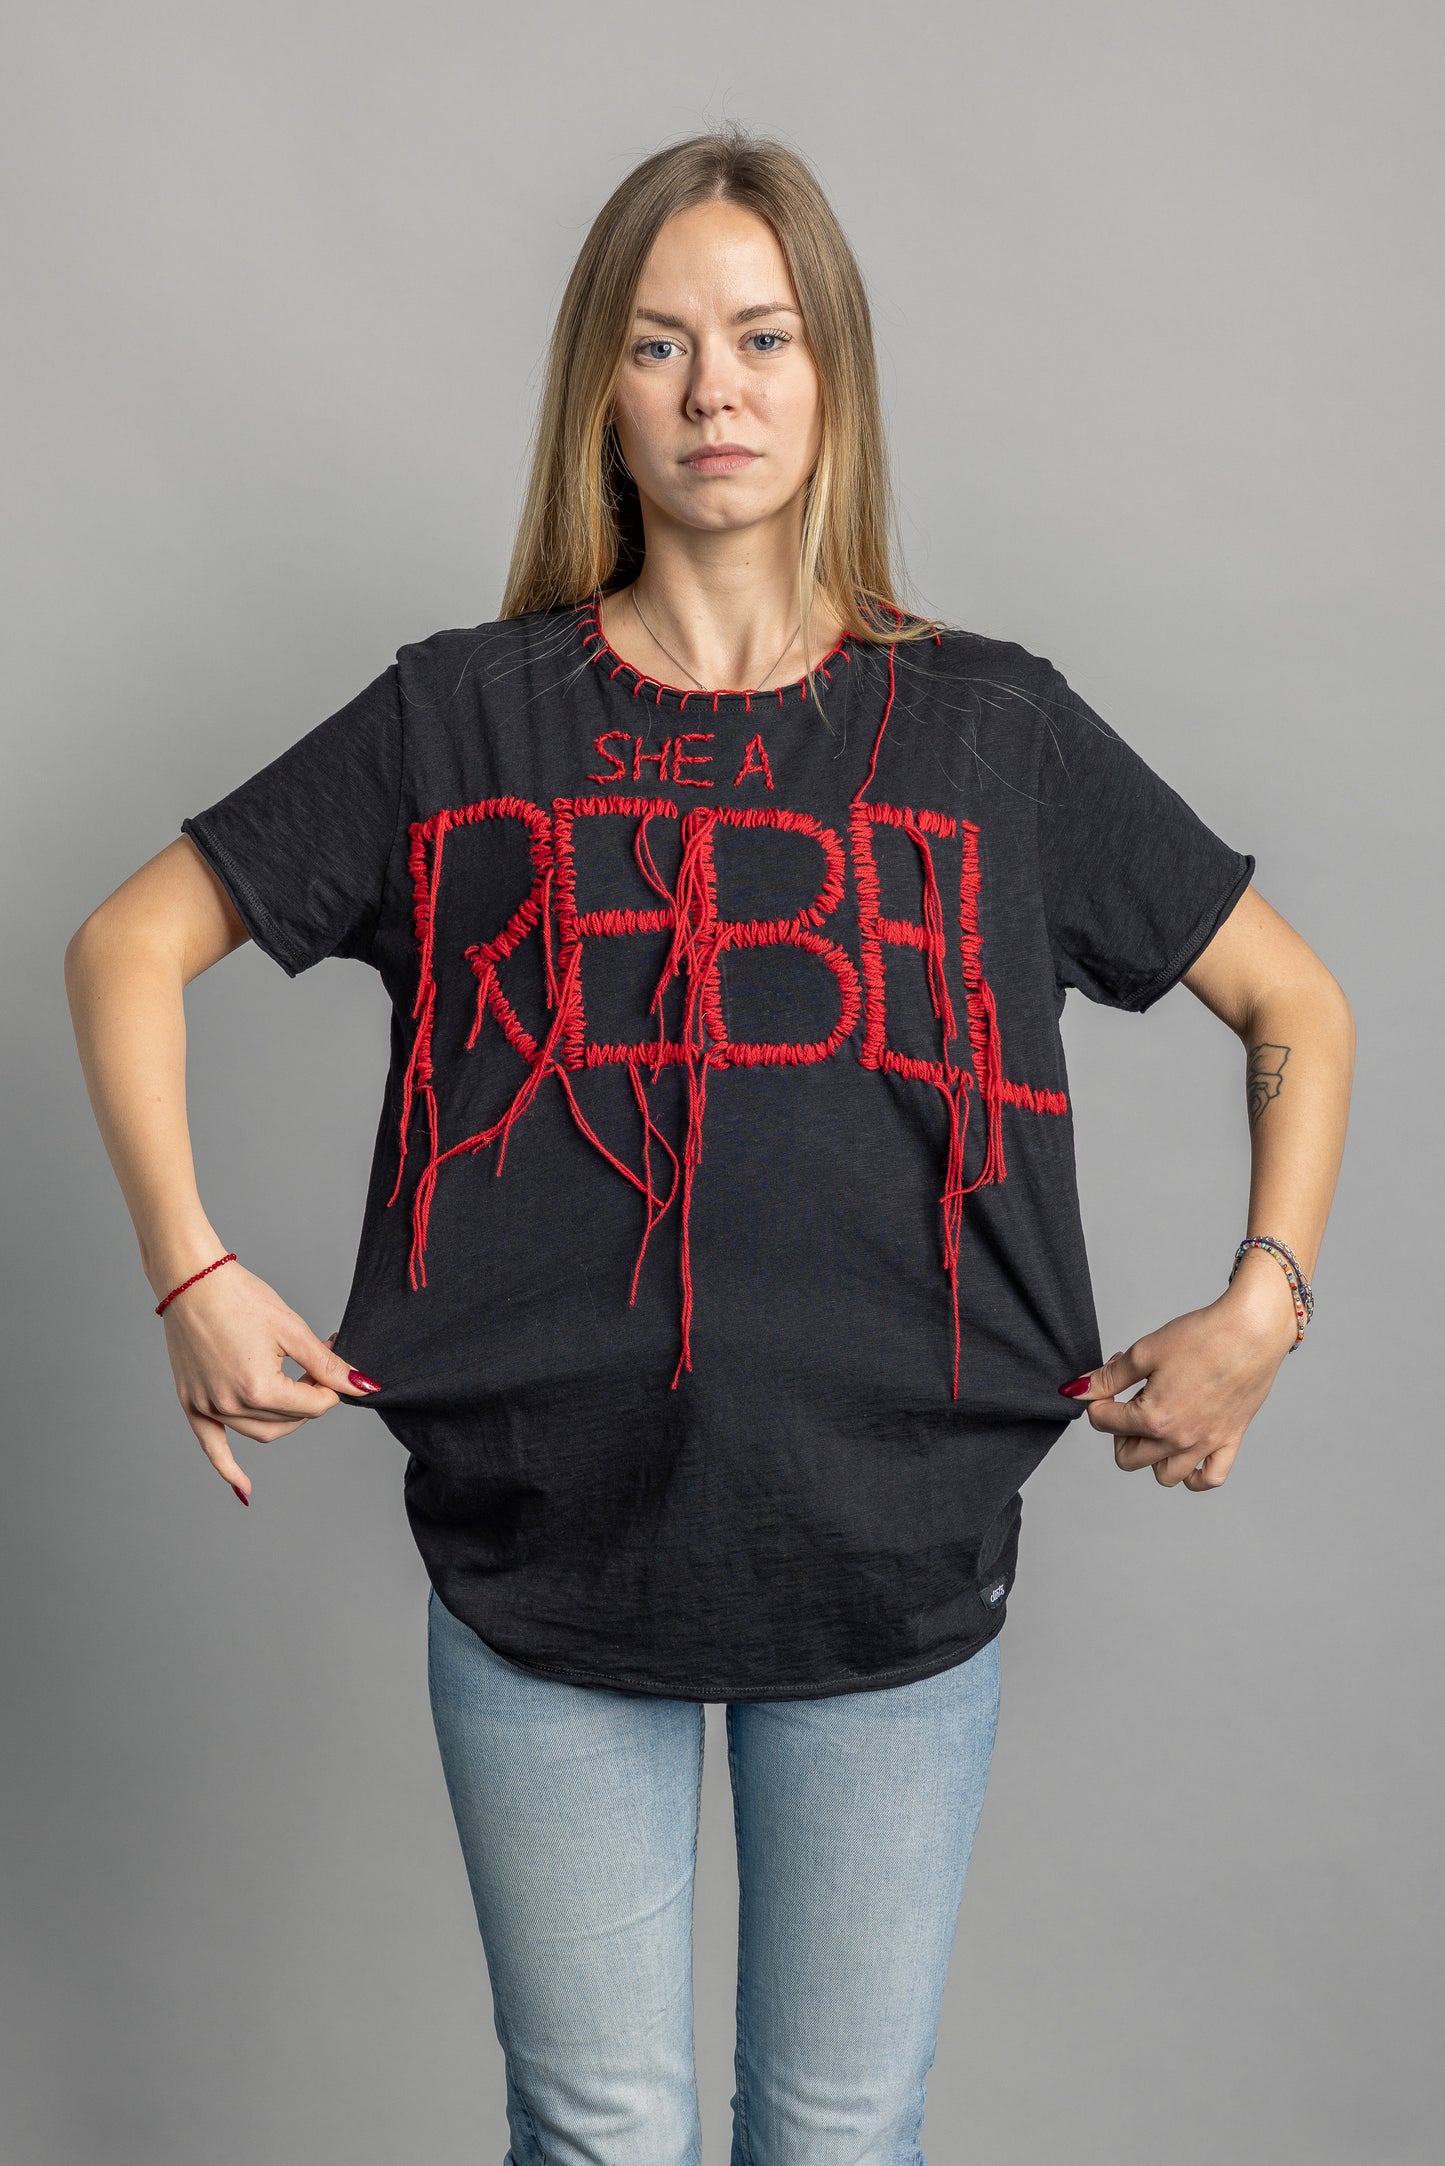 Upcycling Masterpiece T-Shirt "REBEL" size S 